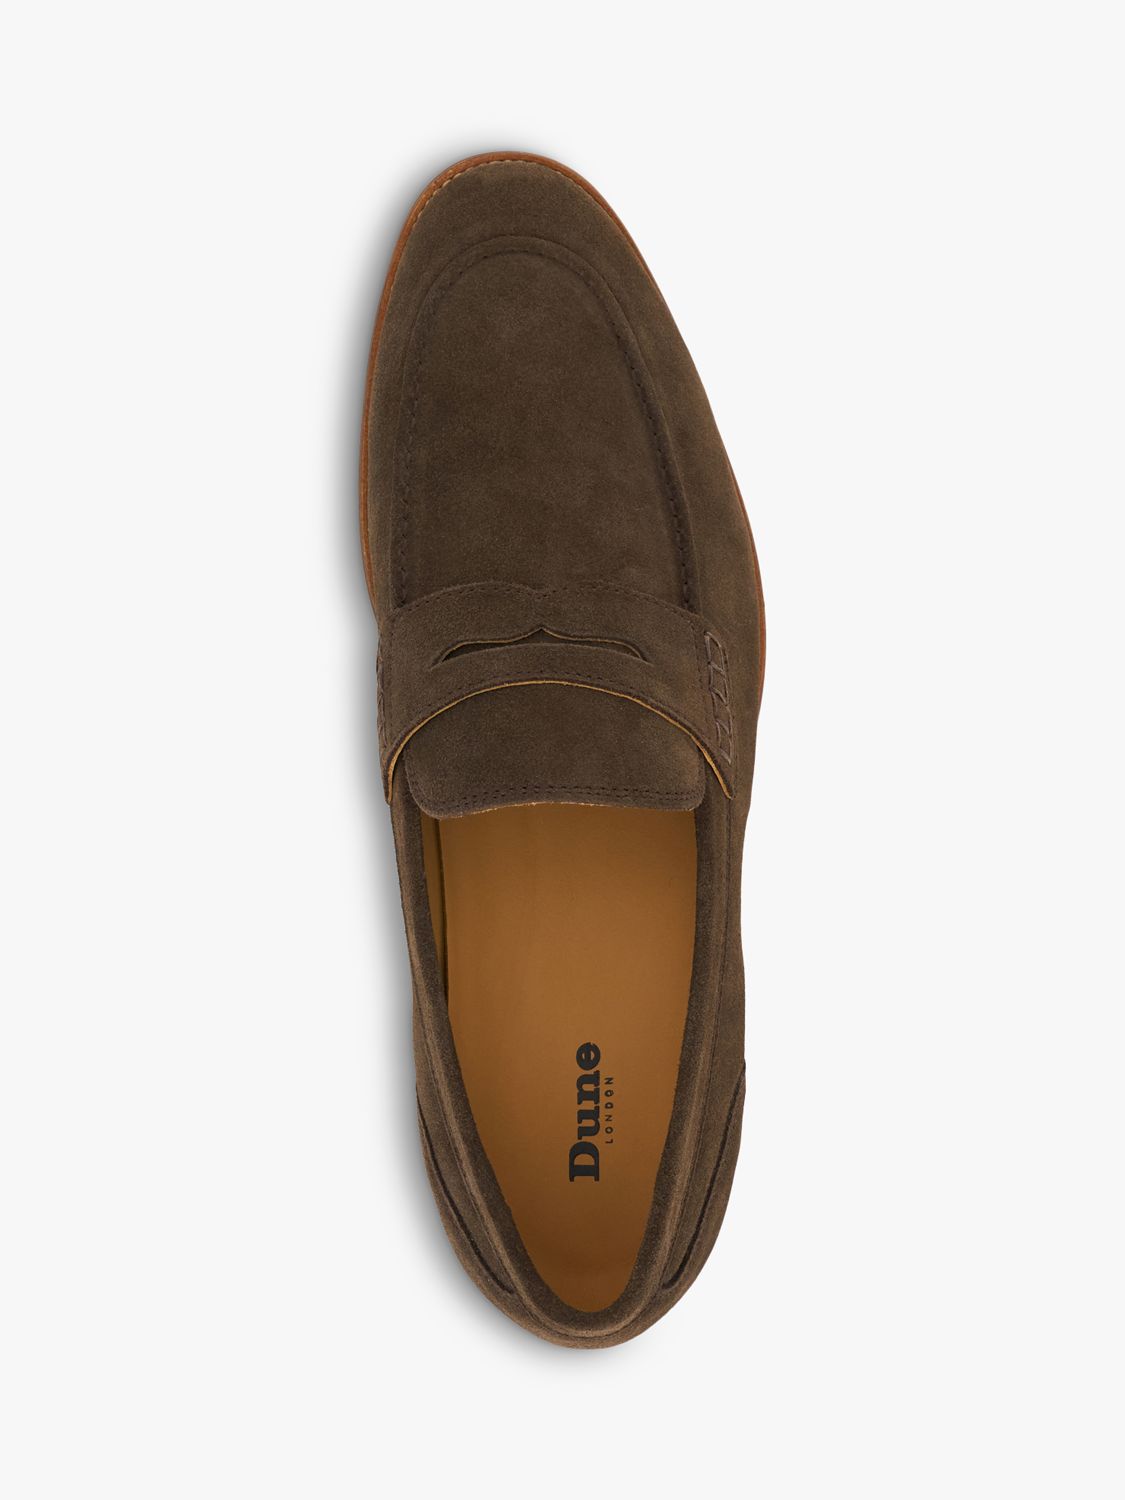 Dune Wide Fit Sulli Suede Penny Loafers, Brown, 7